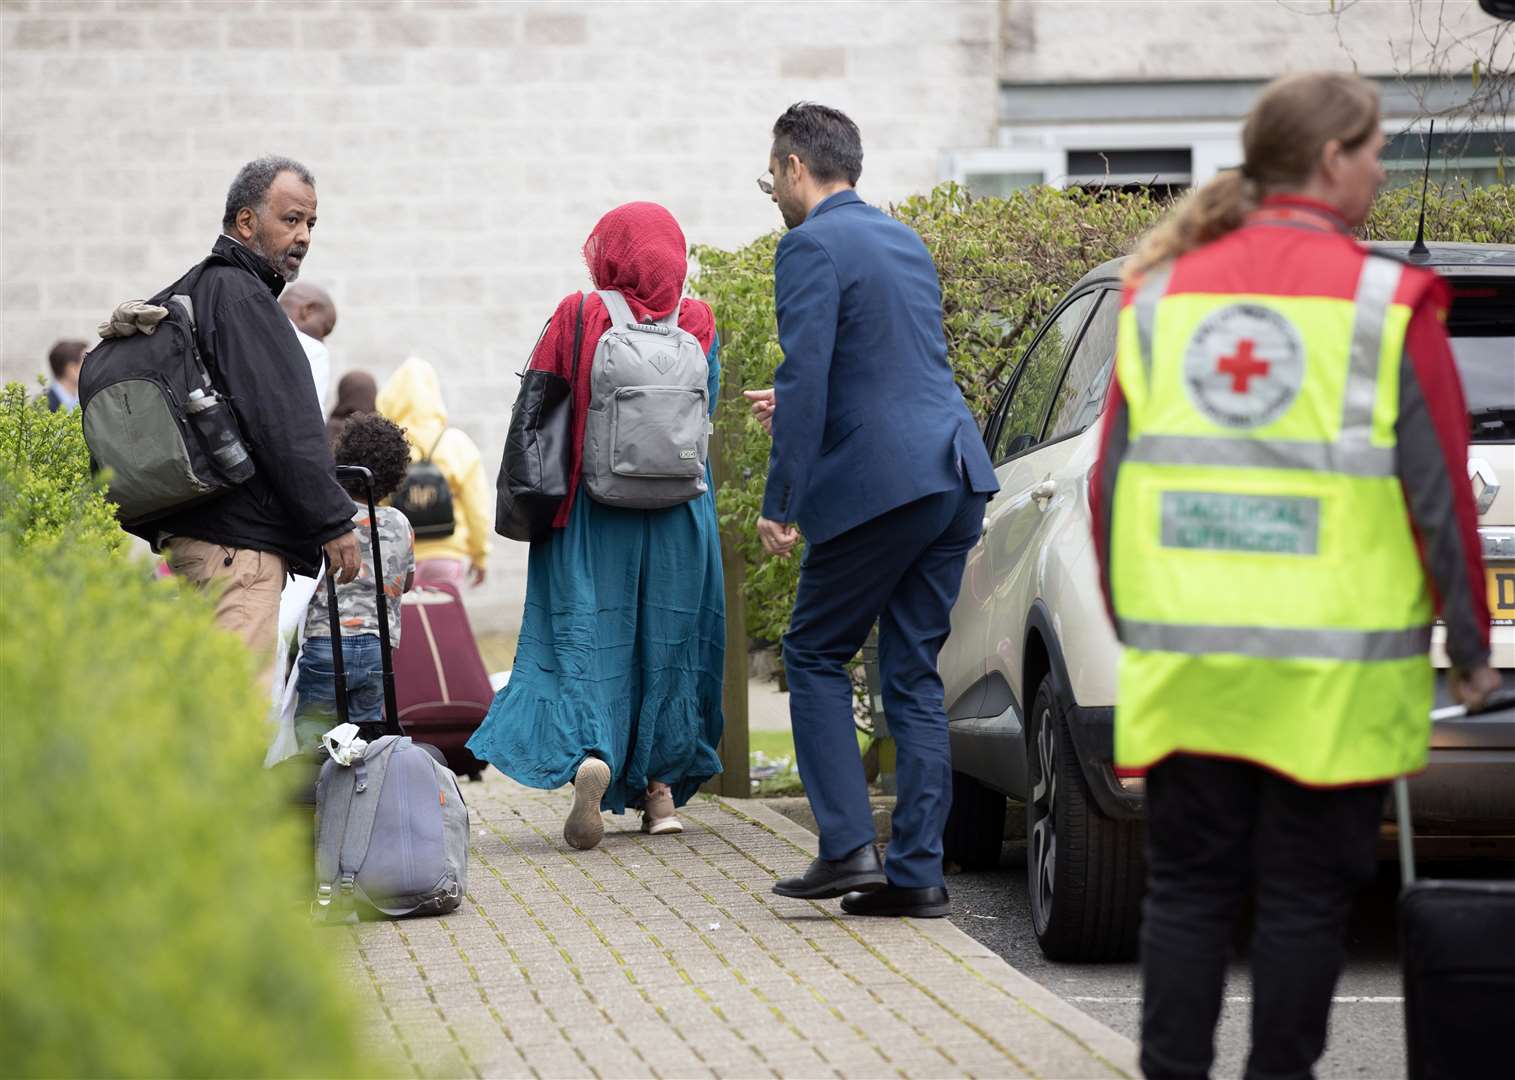 The Foreign Office has said 897 people have been evacuated from Sudan on eight UK flights (Chris Radburn/PA)